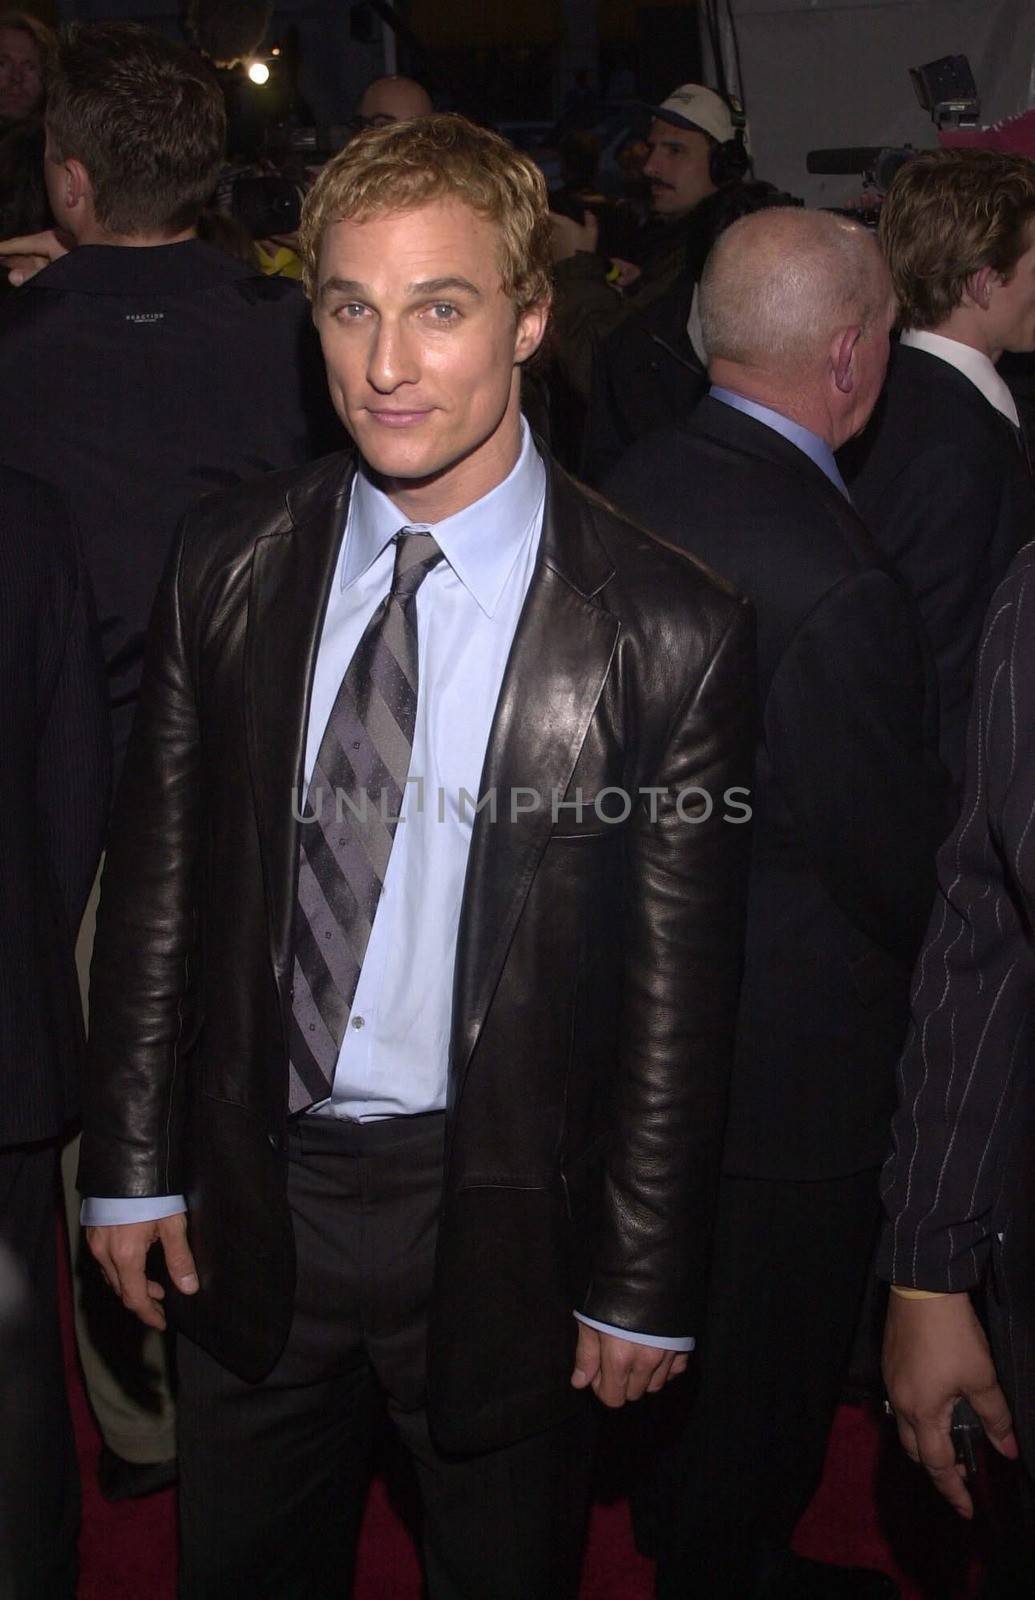 Matthew McConaughey at the premiere of Universal's "U-571" in Westwood, 04-17-00